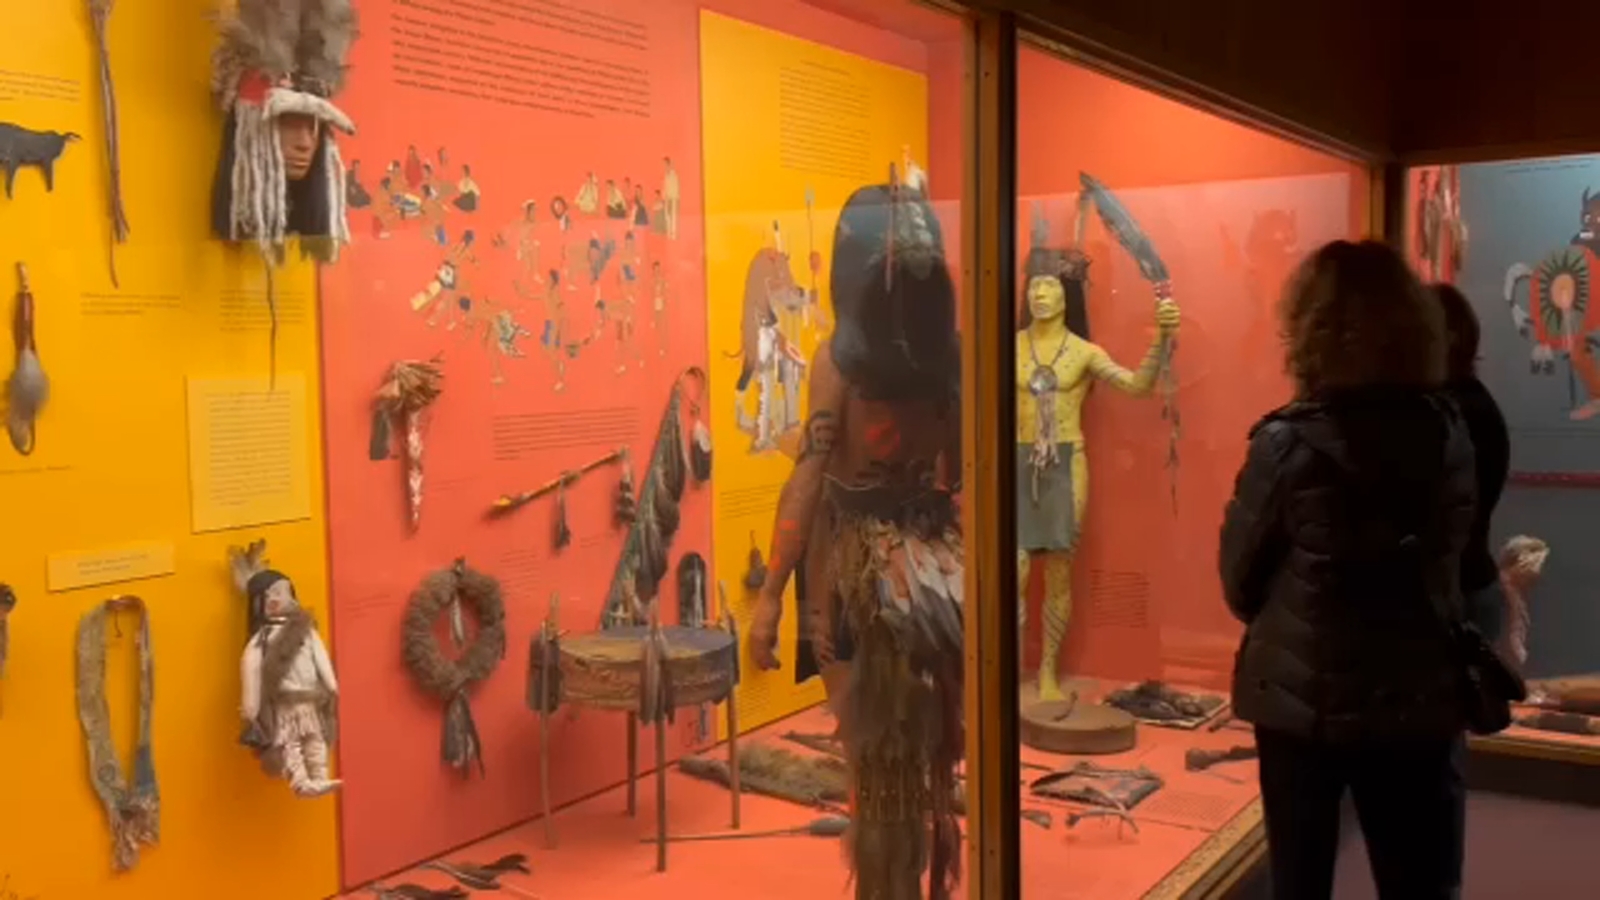 New Federal Regulations Prompt Closure of Native American Halls at NYC's Museum of Natural History